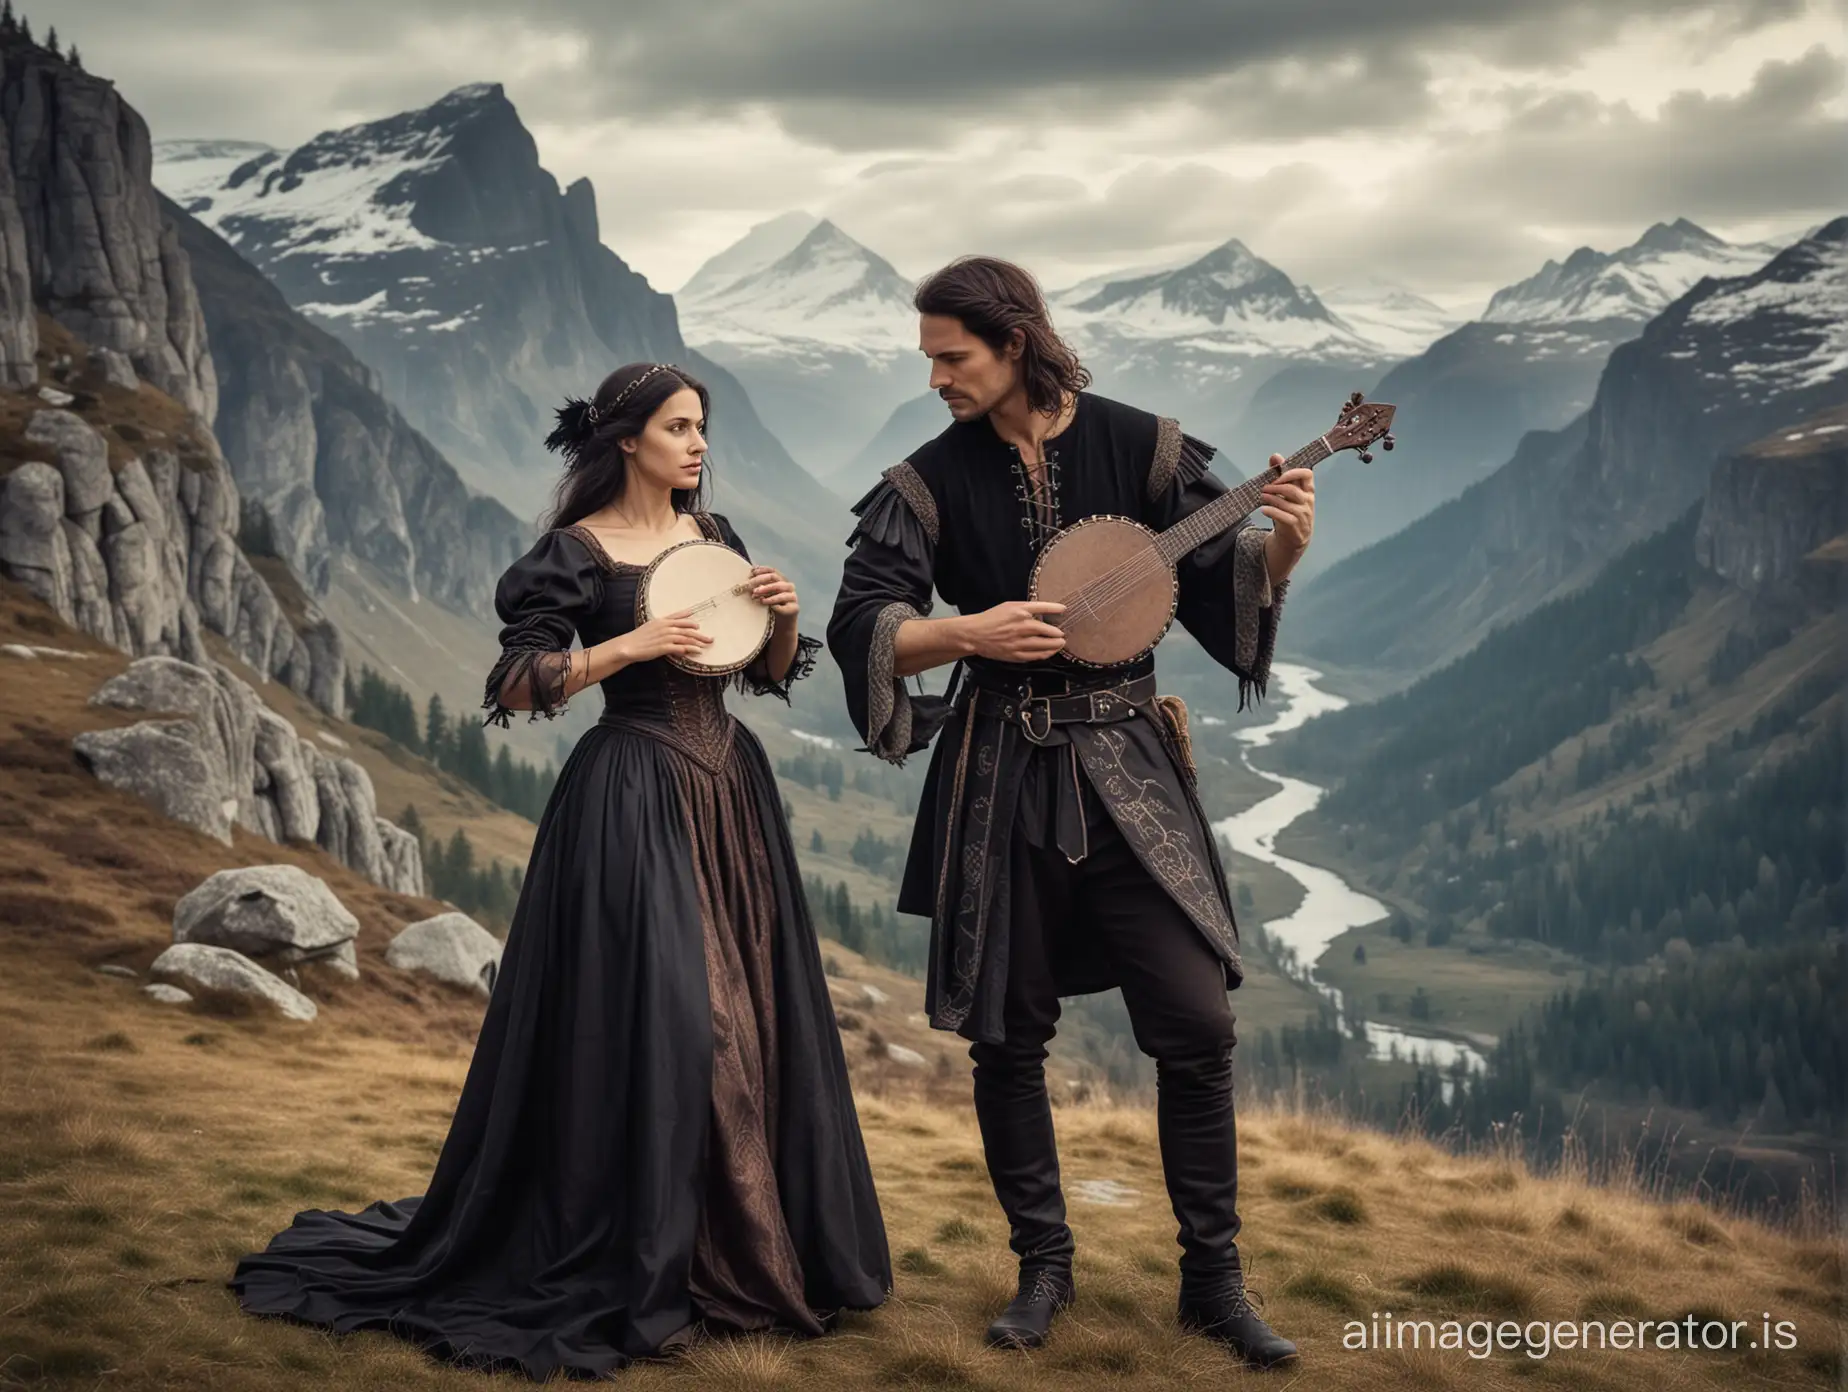 Nordic-Couple-in-Medieval-Witch-Attire-Playing-Musical-Instruments-against-Mountain-Backdrop